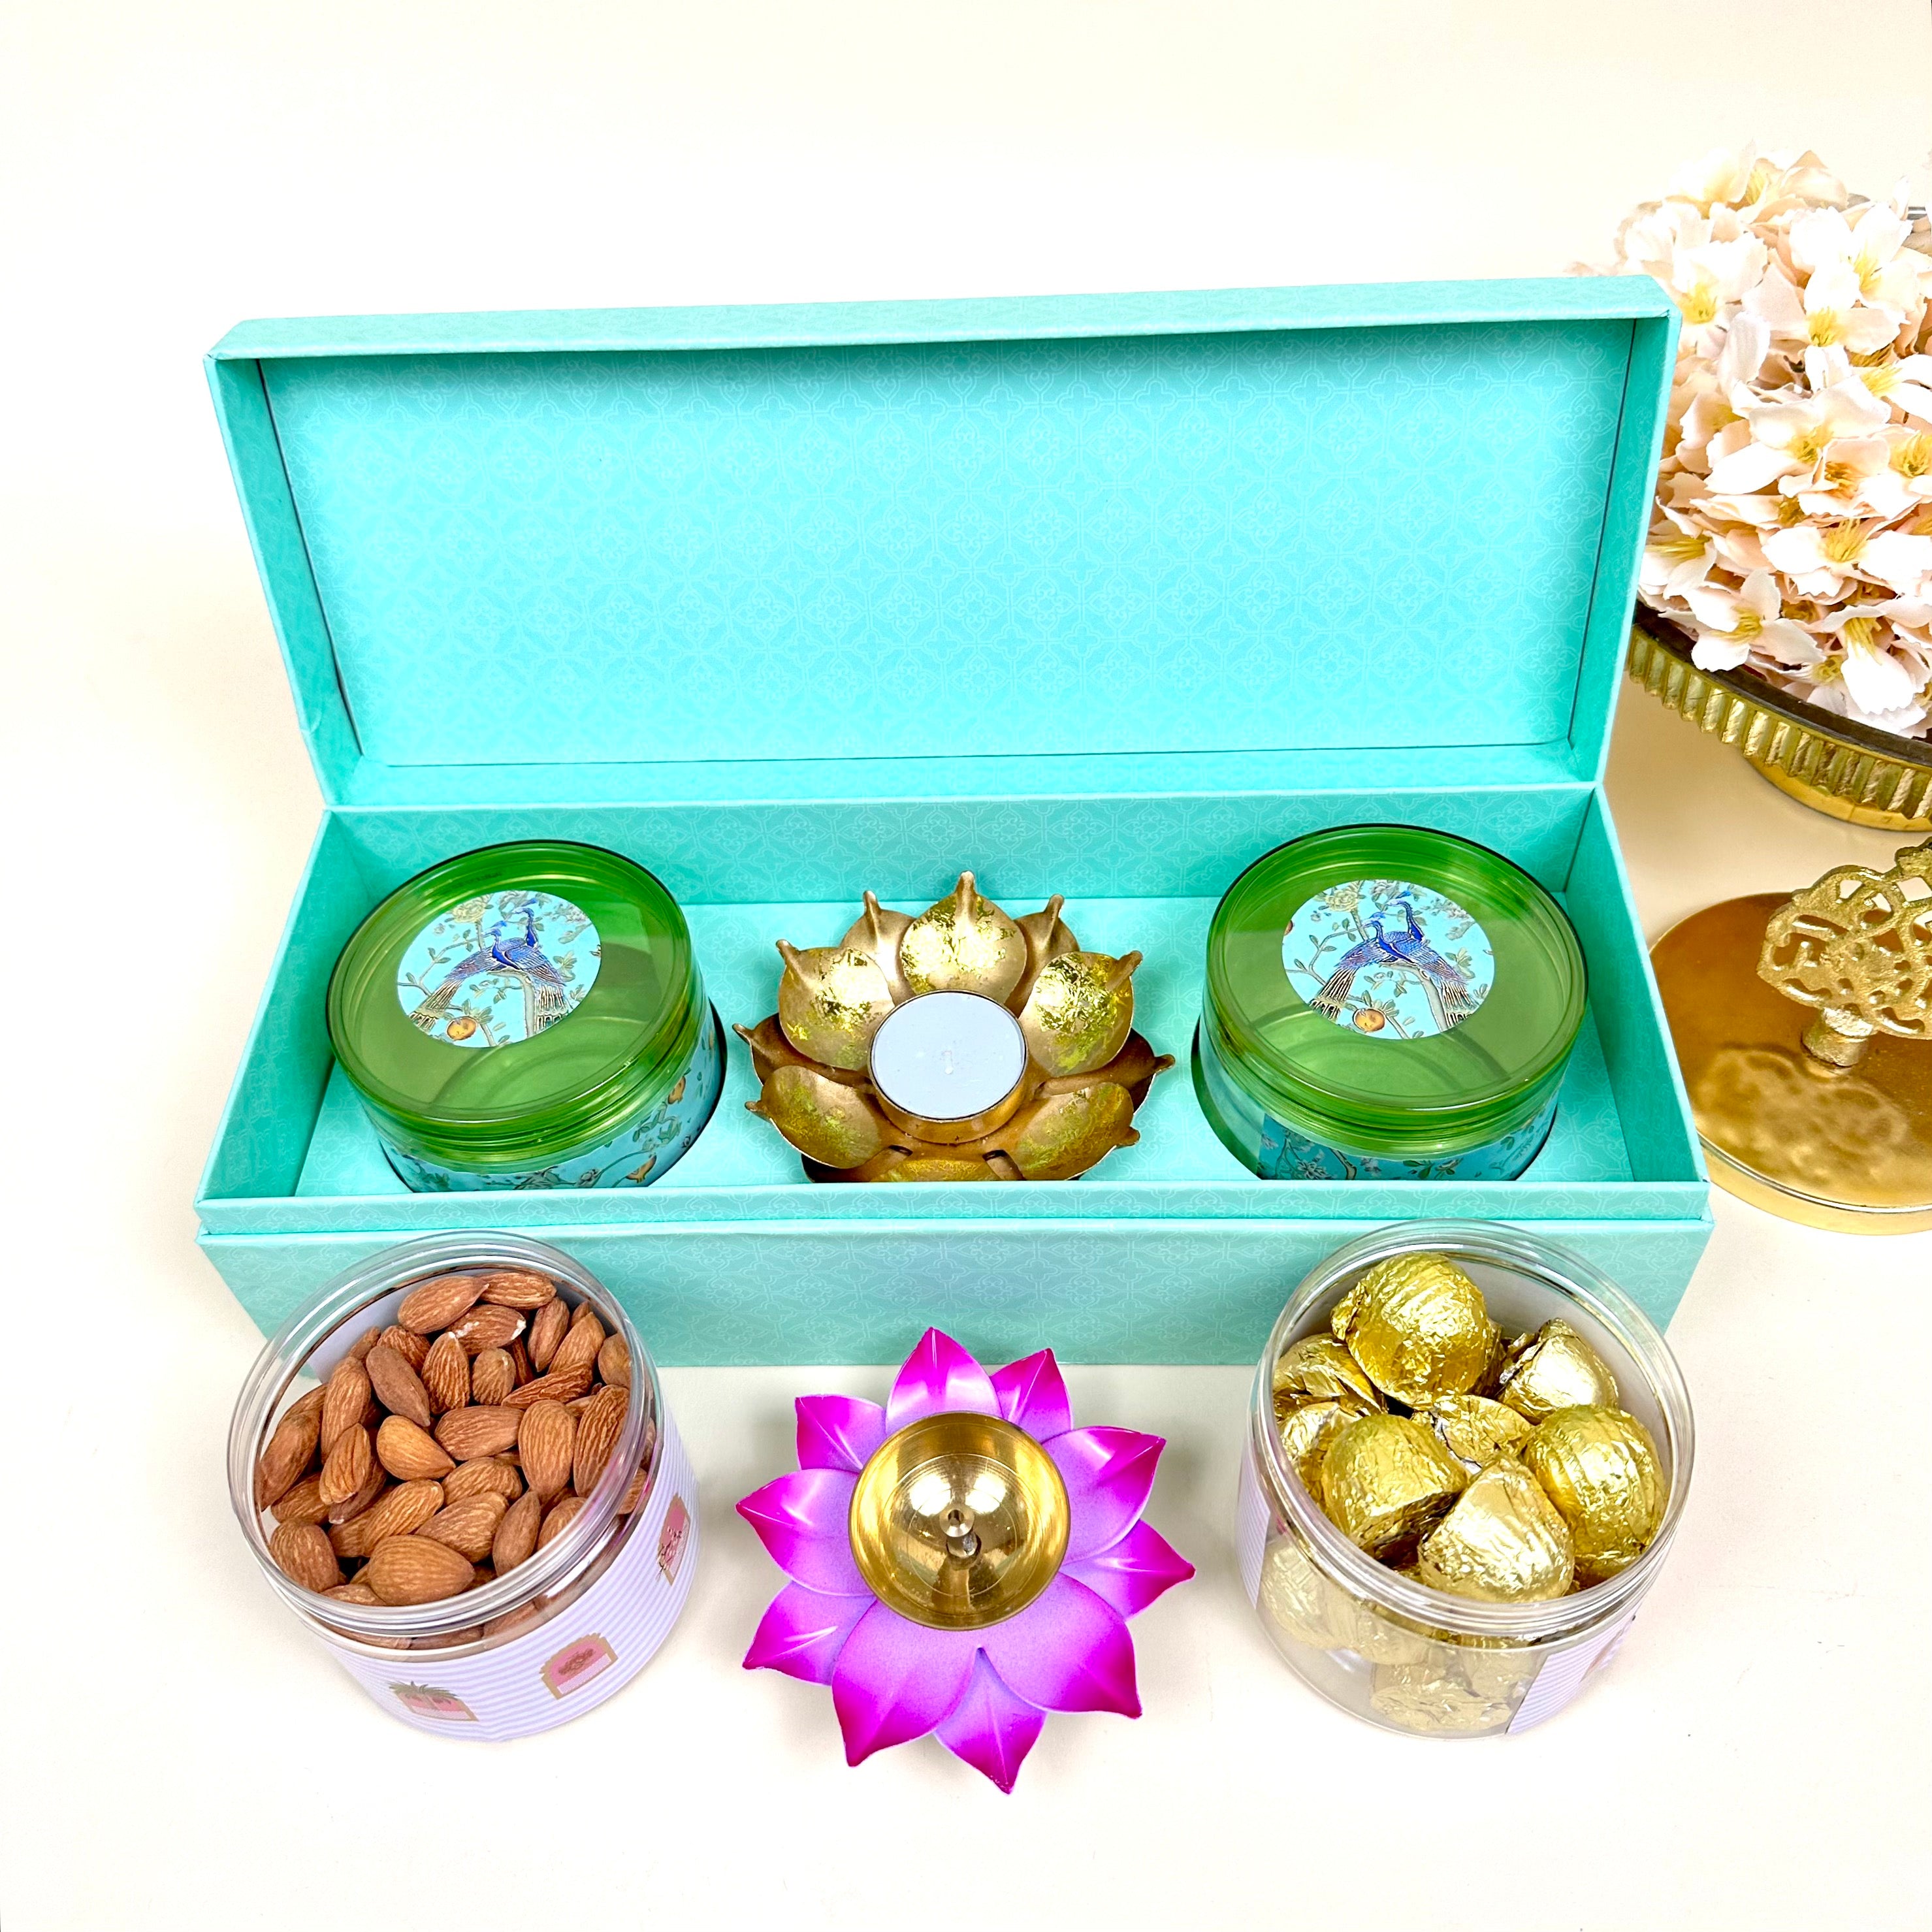 NutriSnacksBox Diwali Gift Hamper for Employees, Family, and Friends | Diwali  Gift Box with Chocolate, Dry Fruits, Cookies, 2 elegant metal Diya with  Tealight and festive Diwali Greeting Card | Corporate Diwali